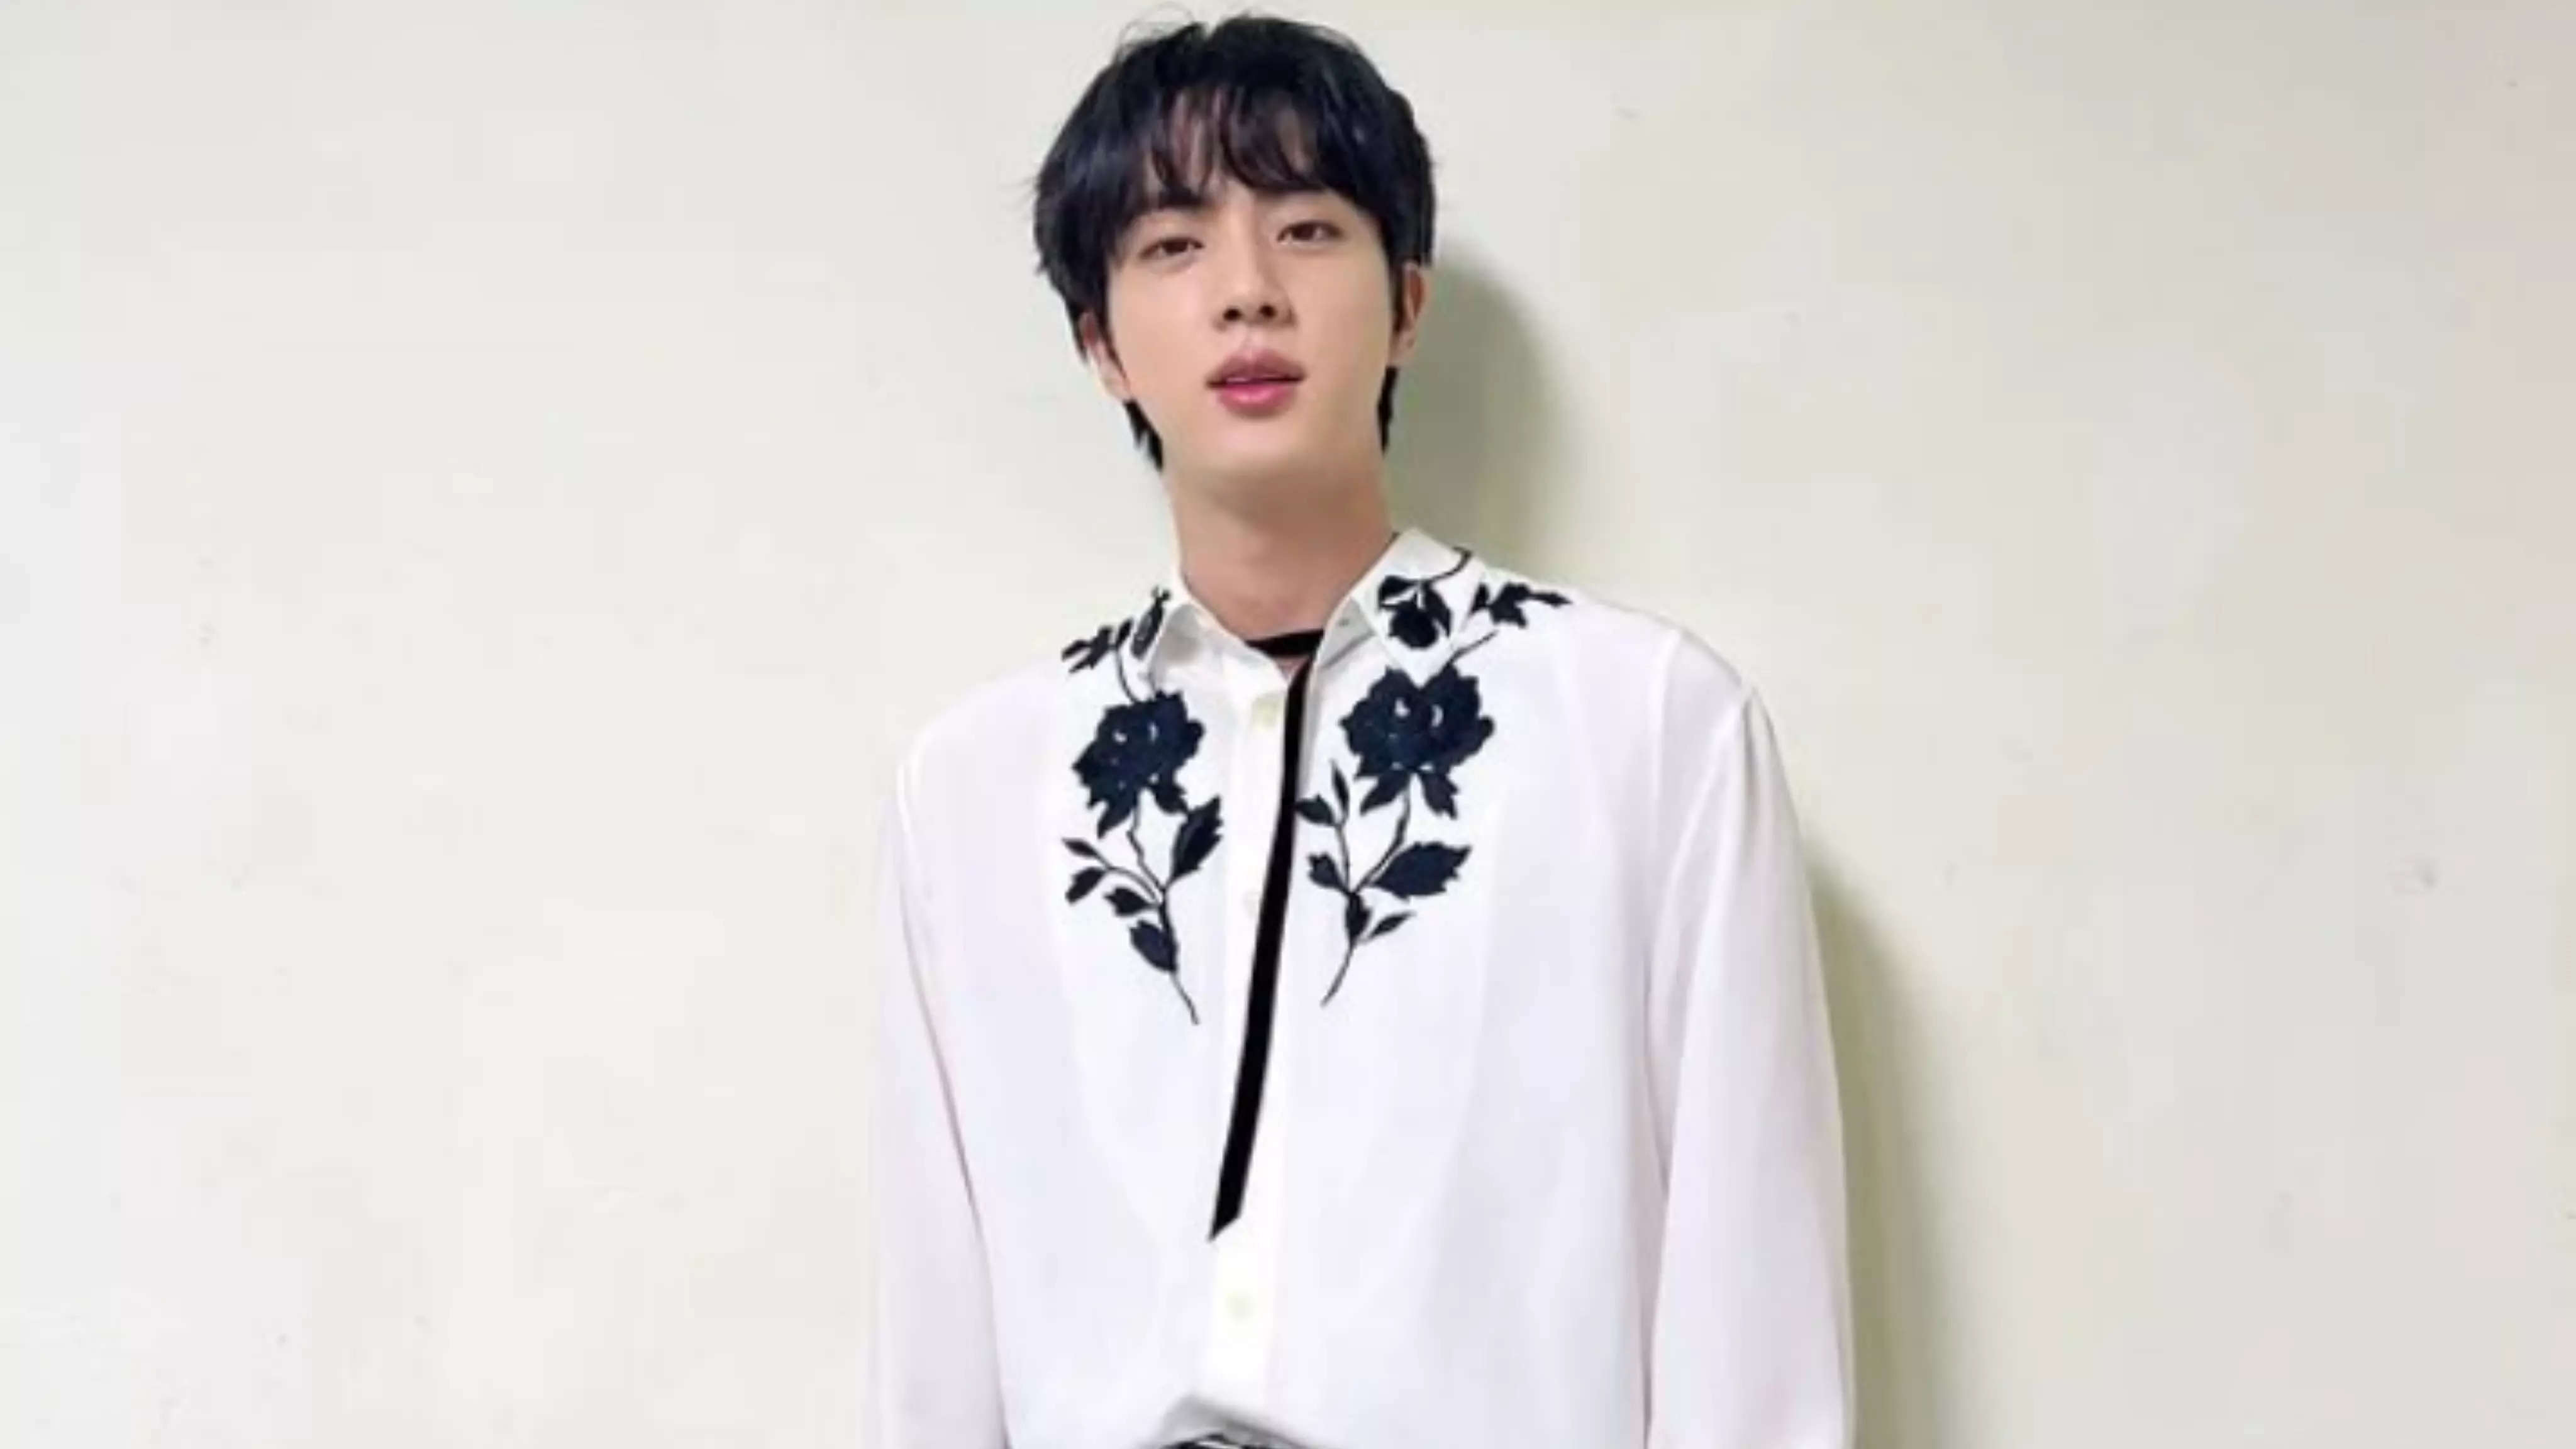 BTS' Jin's first post-military live crashes